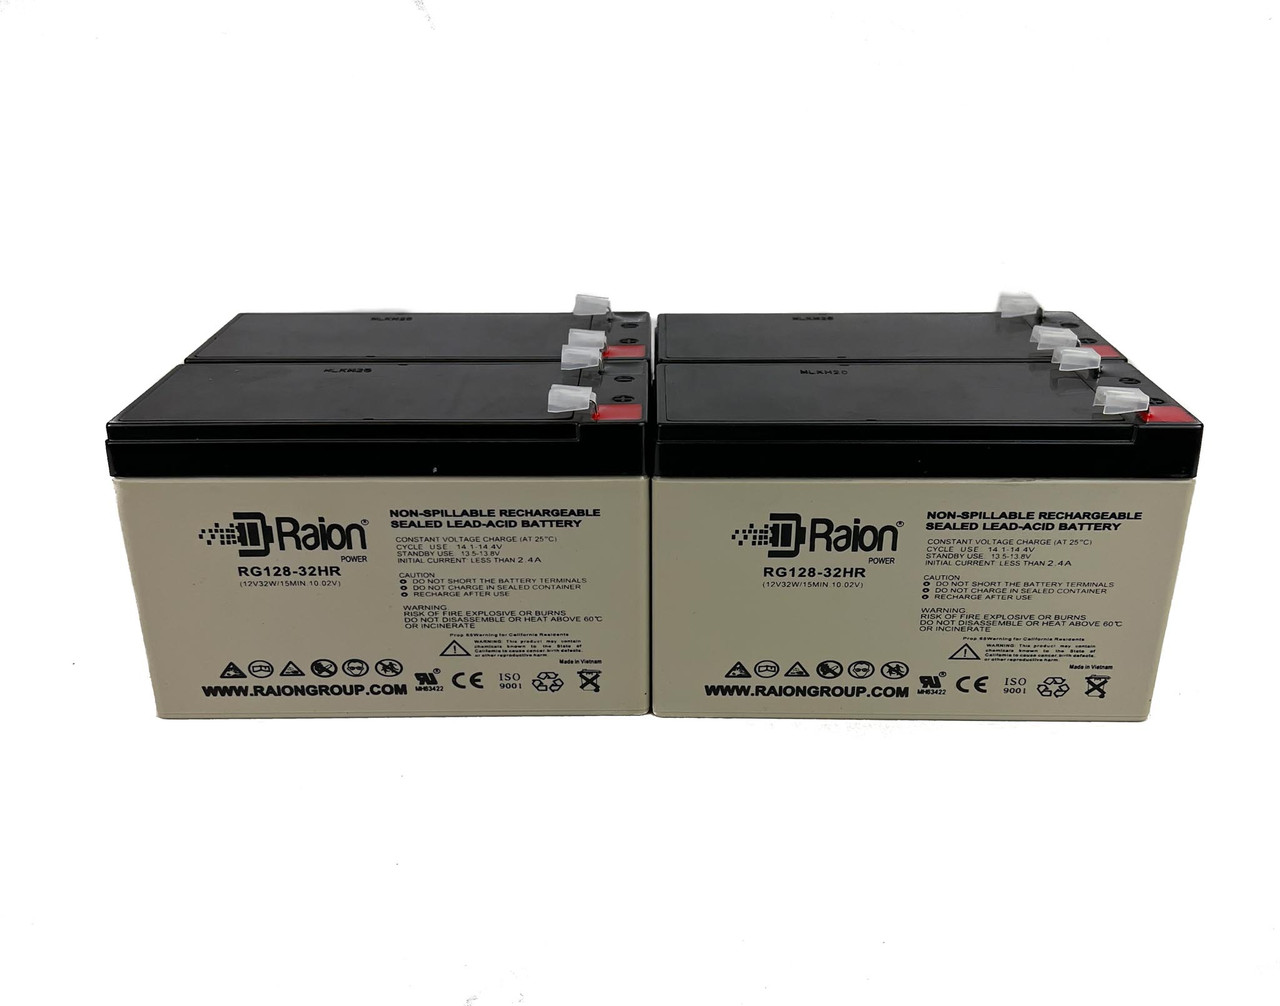 Raion Power 12V 7.5Ah High Rate Discharge UPS Batteries for Powerware 05146502-6591 - 4 Pack